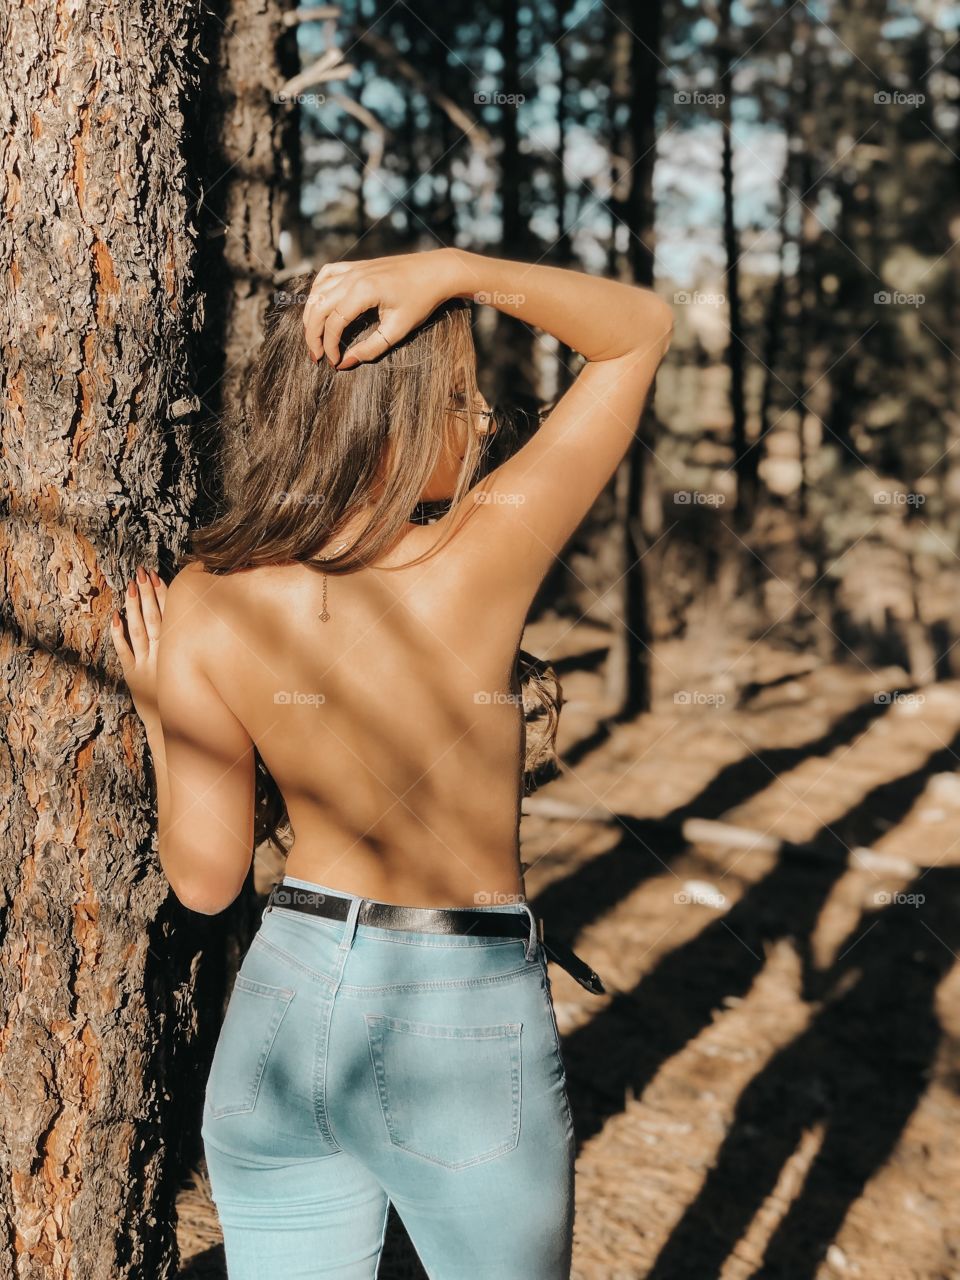 Young tan girl posing topless in the sunny shadows of the trees.